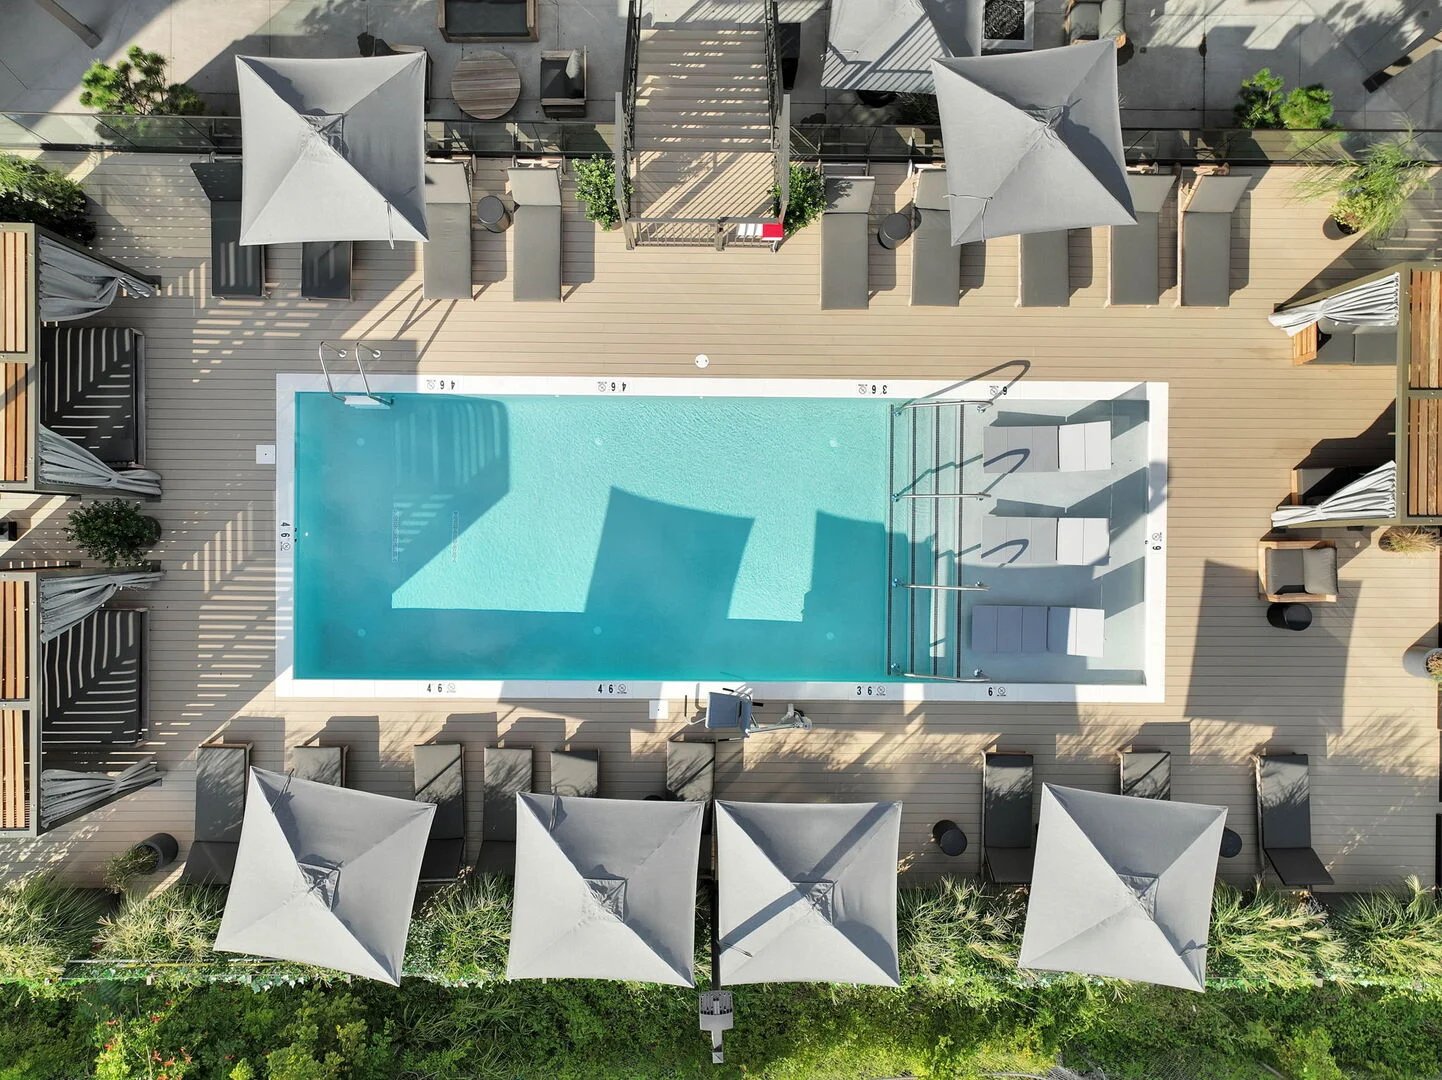 Communal Area: Sparkling Blue Pool with covered cabanas, sun loungers, and a wheelchair lift.